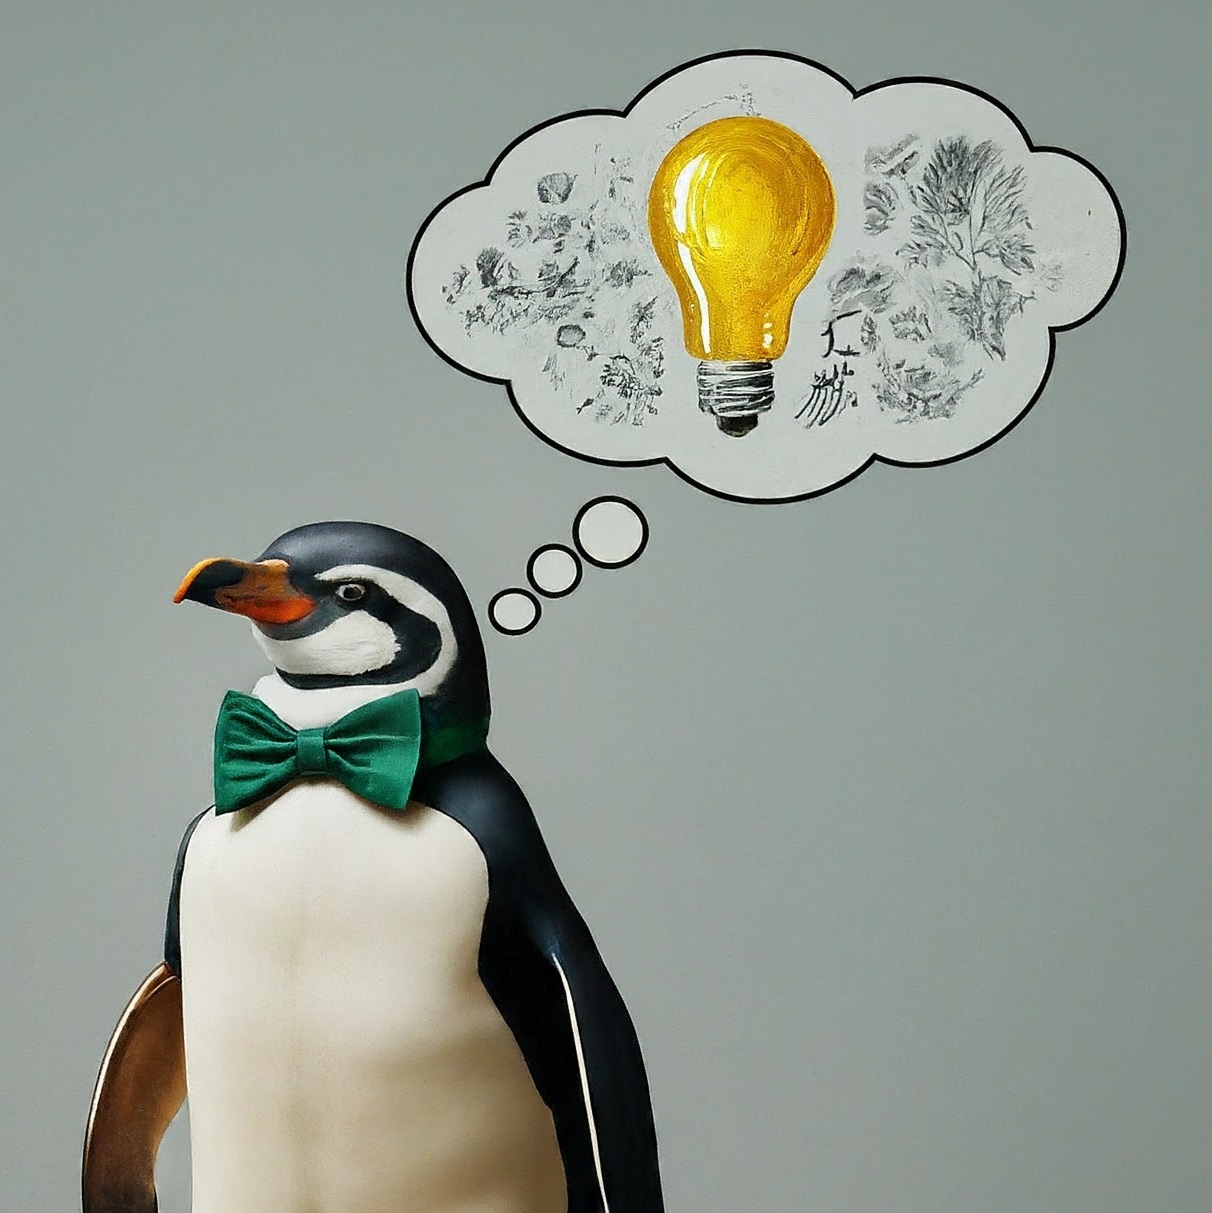 Penguin thinking creative campaigns resized